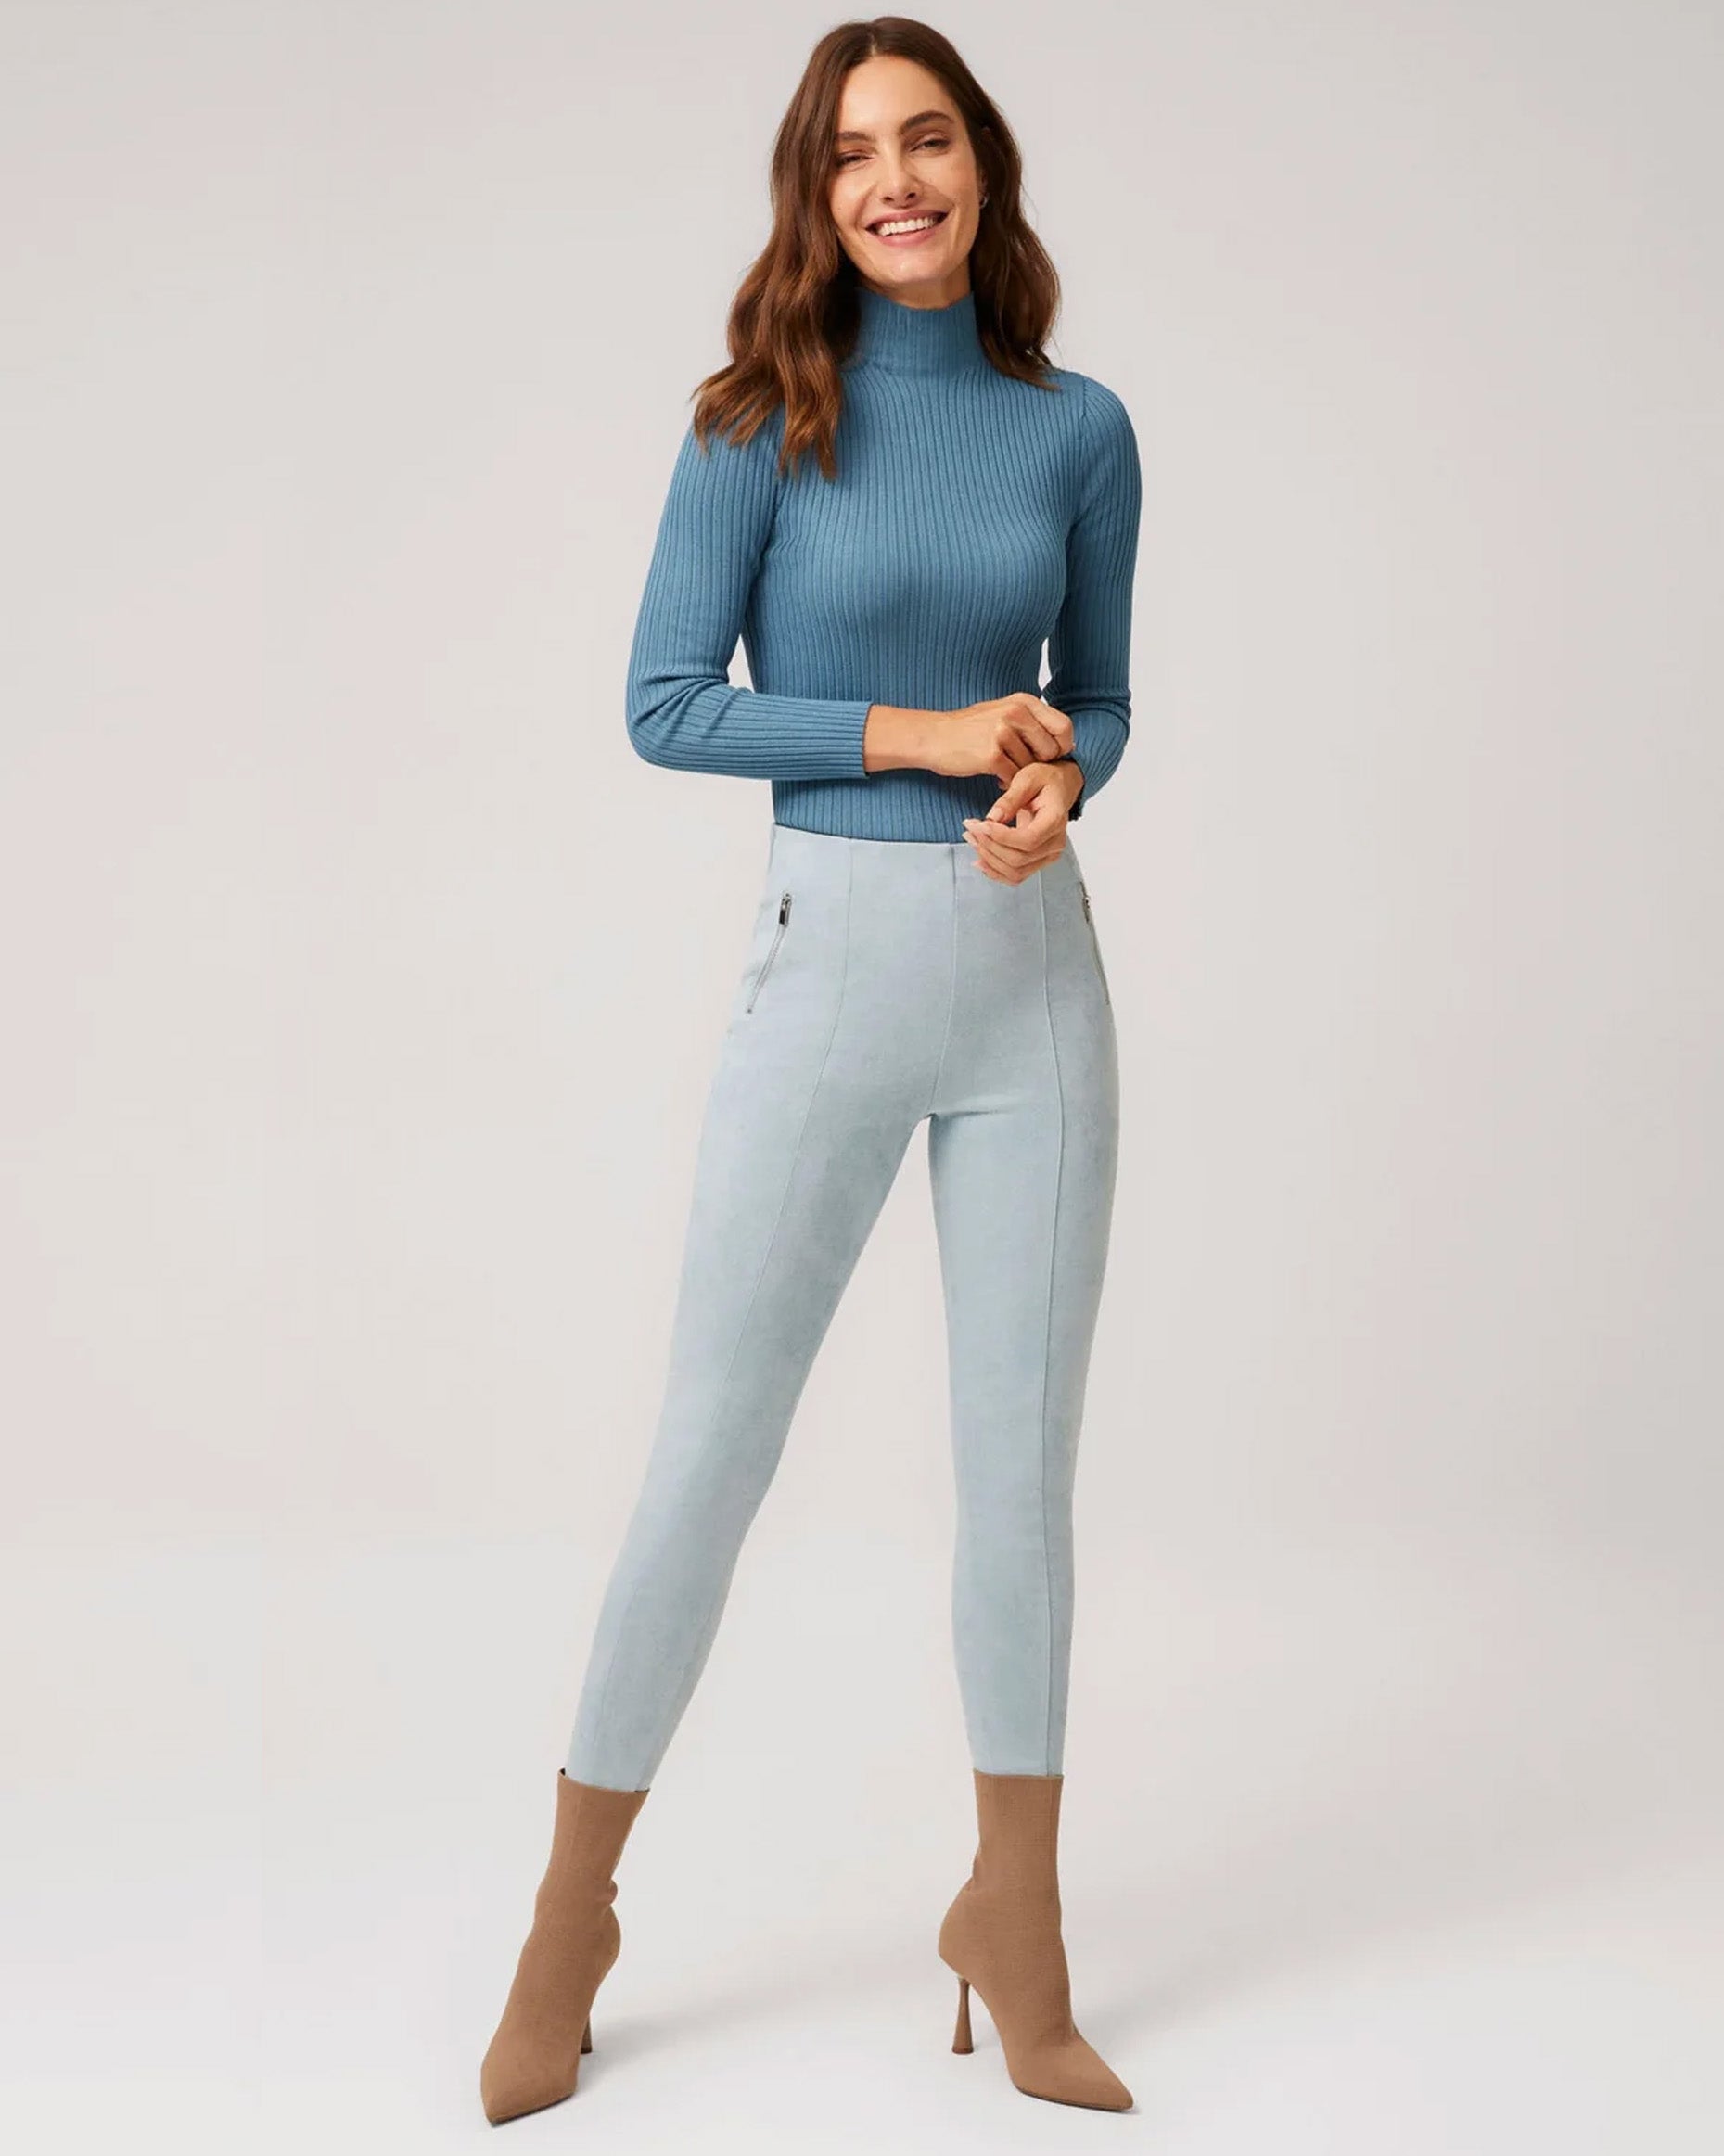 Ysabel Mora 70297 Faux Suede Leggings - Light pastel blue plush velour suede effect high waisted trouser leggings, worn with tan heeled ankle boots and blue turtle neck top.